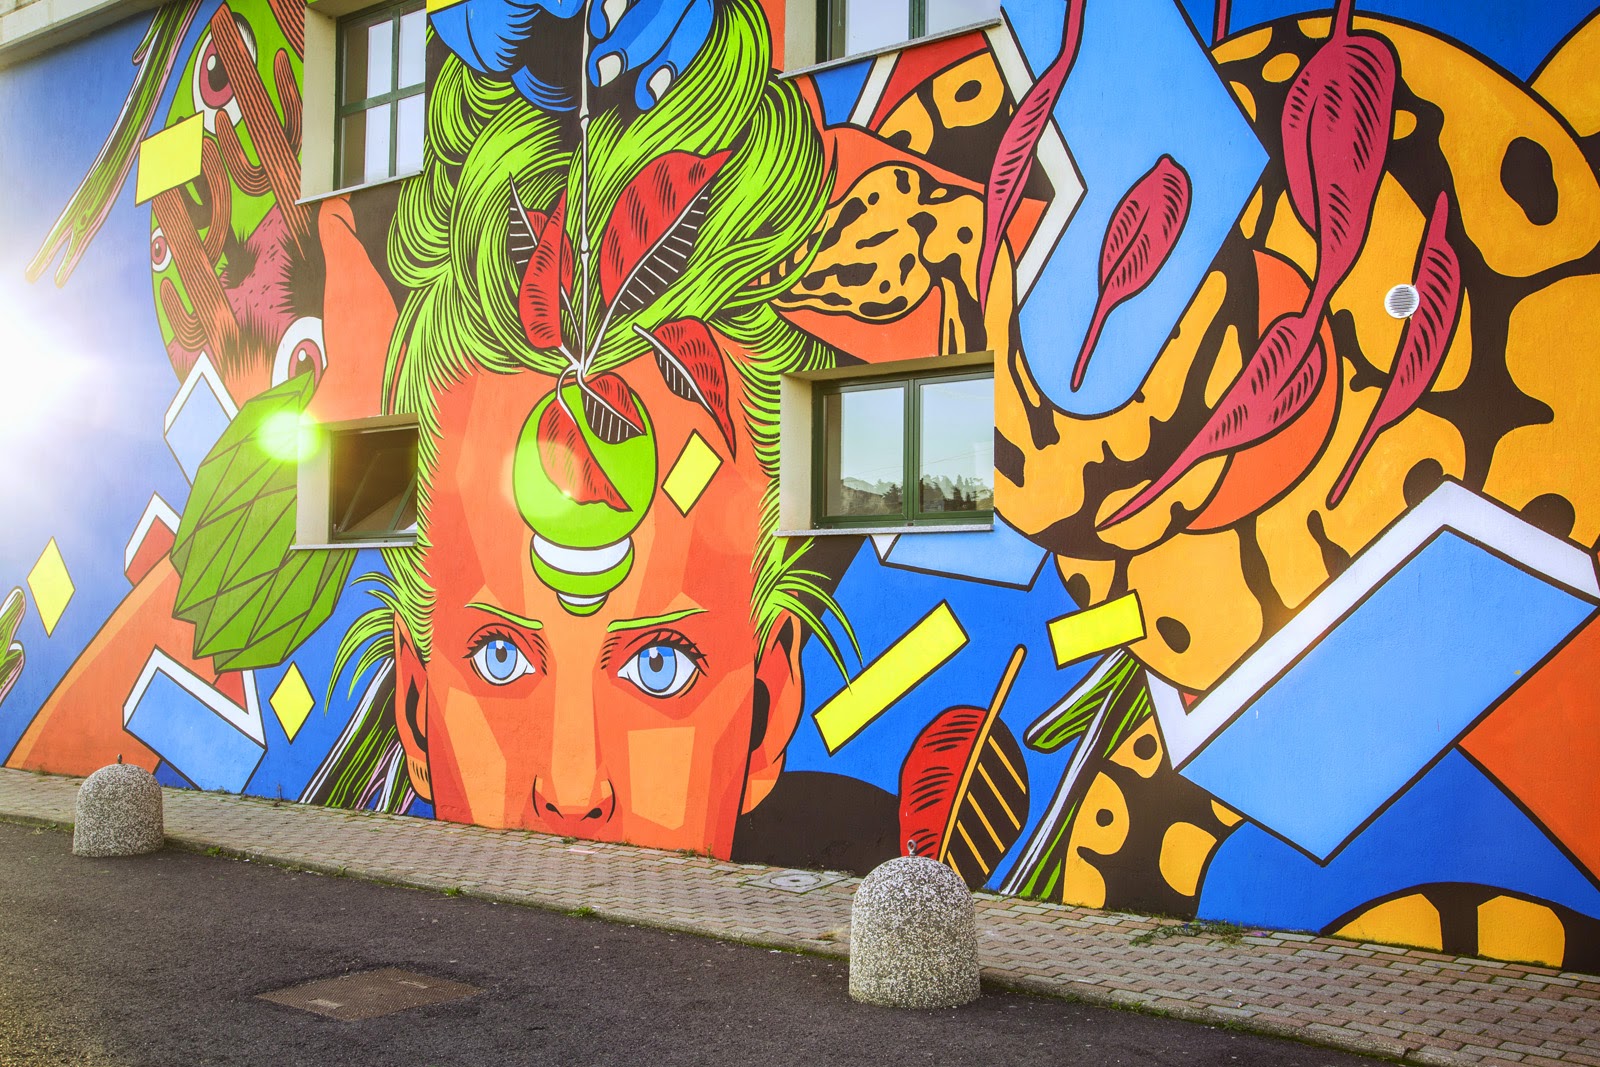 After Gaeta and Terracina, Bicicleta Sem Freio stopped by the city of Pinerolo in Italy to work on a tropical new piece.